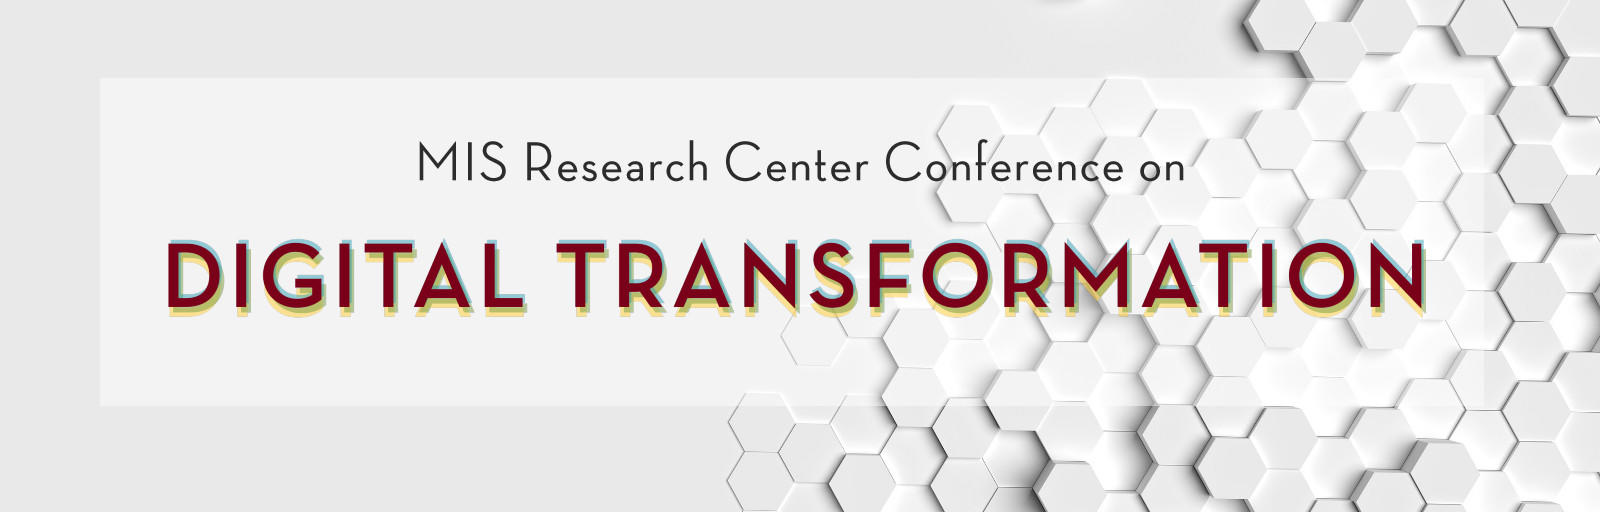 MIS Research Center Conference on Digital Transformation